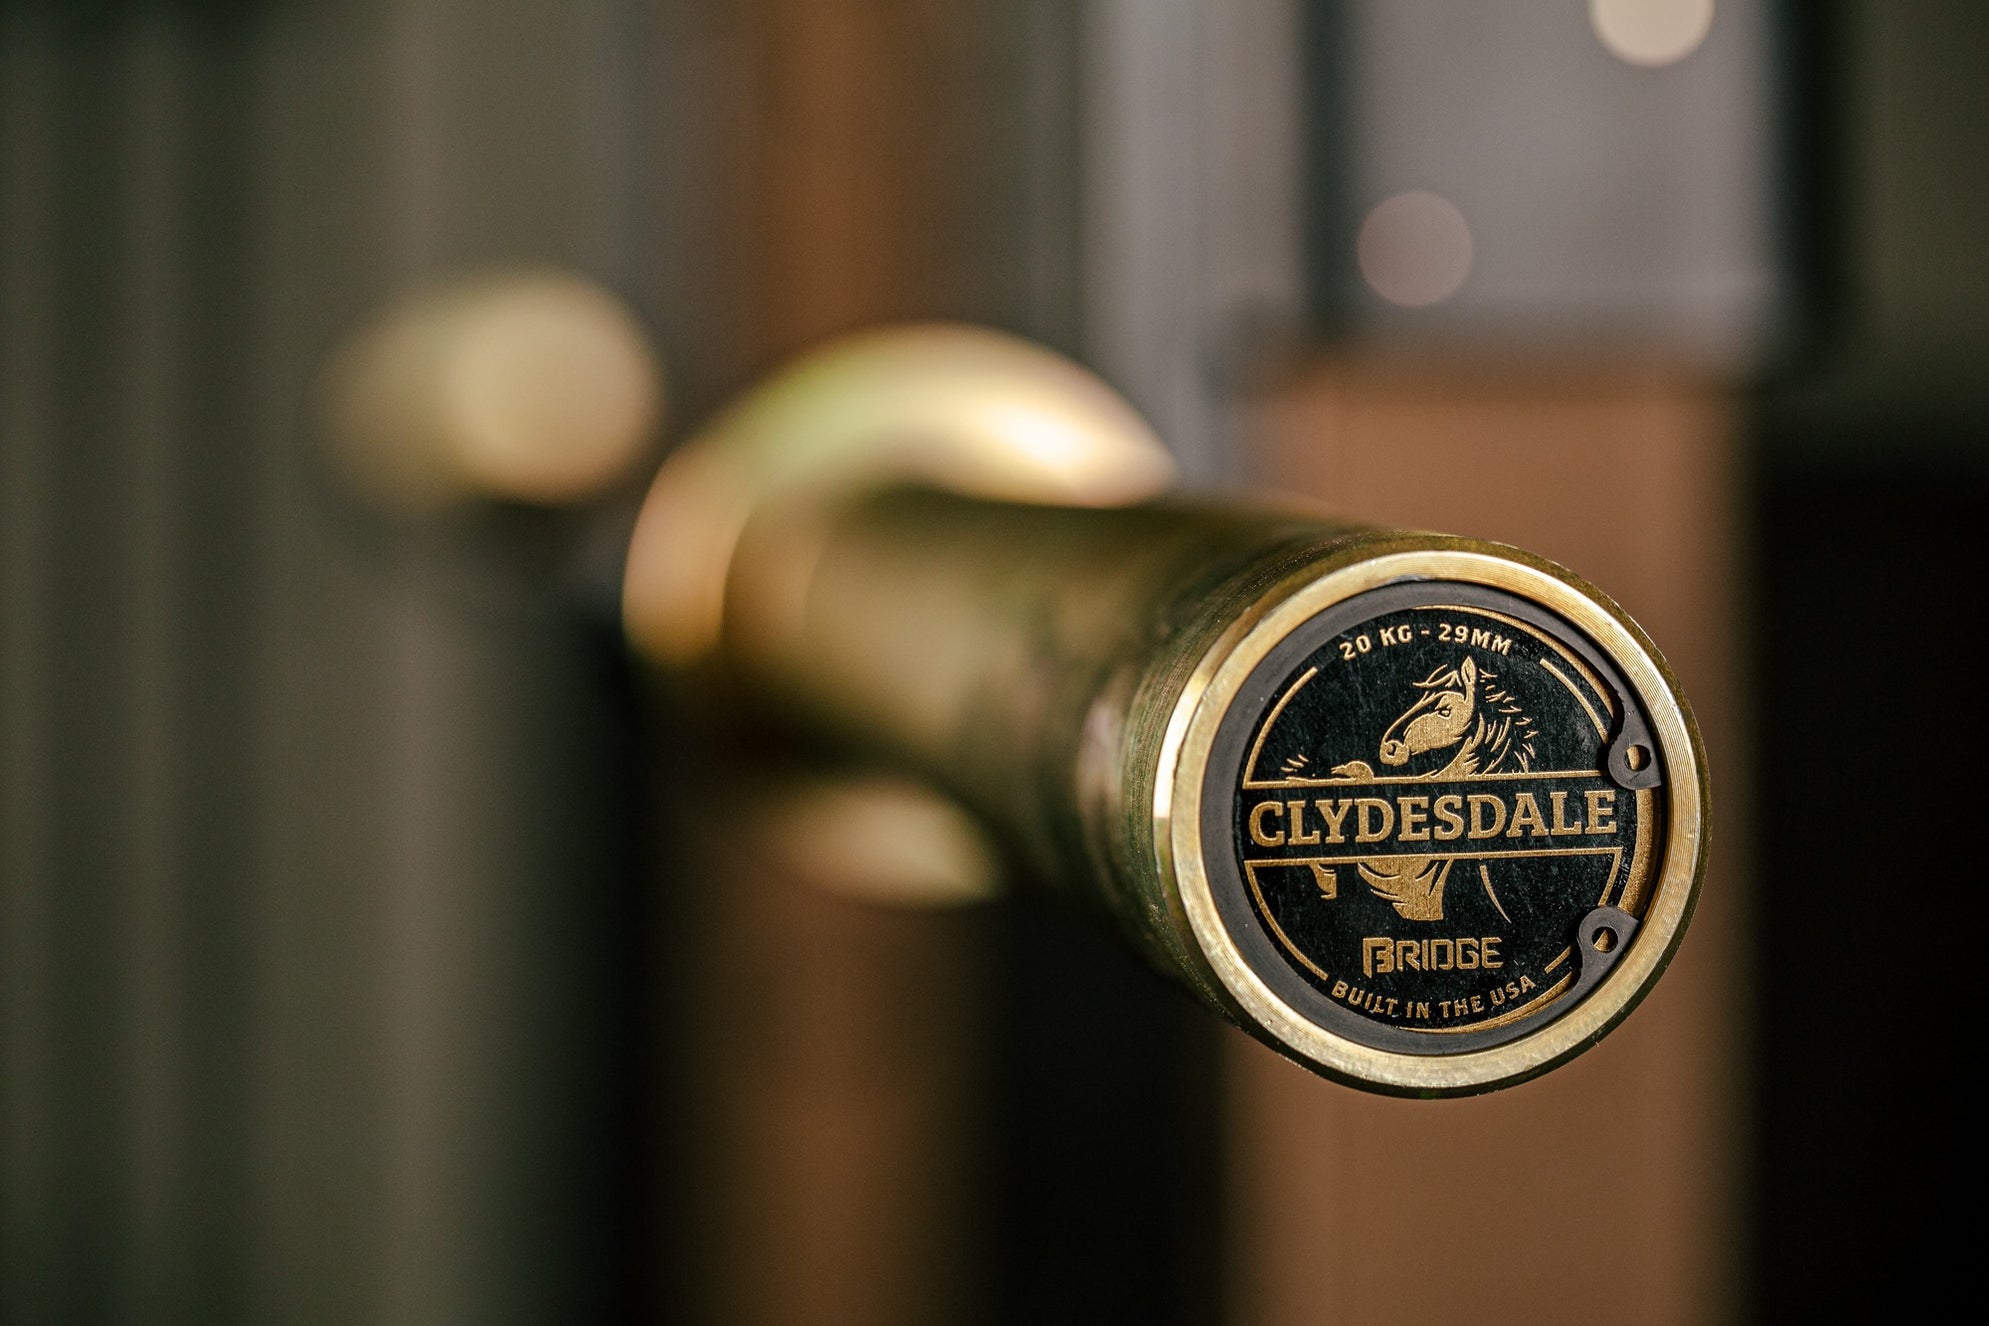 endcap of clydesdale barbell with the clydesdale logo